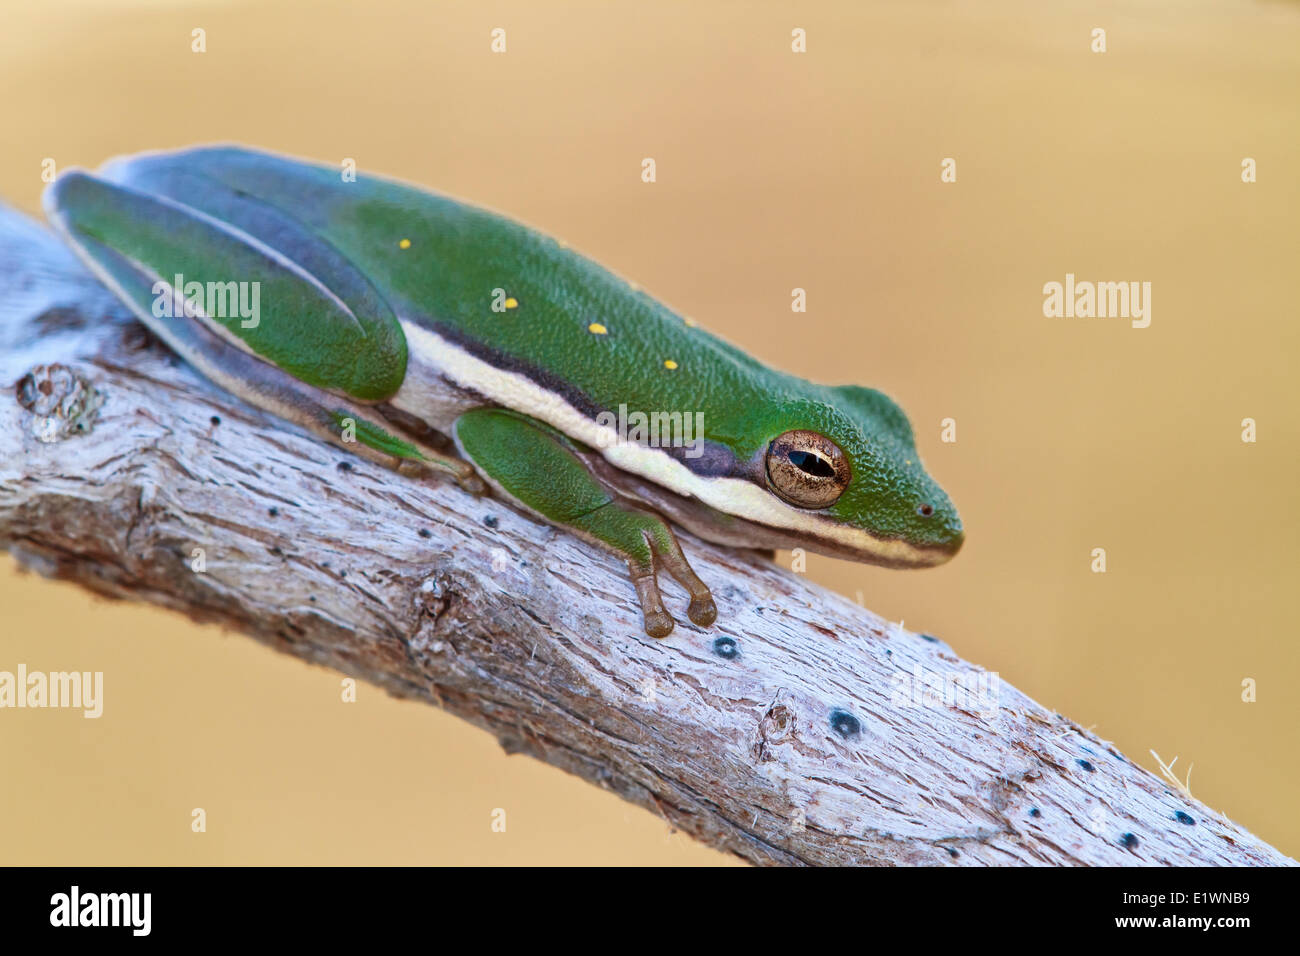 American green tree frog in Everglades National Park, Florida. Stock Photo